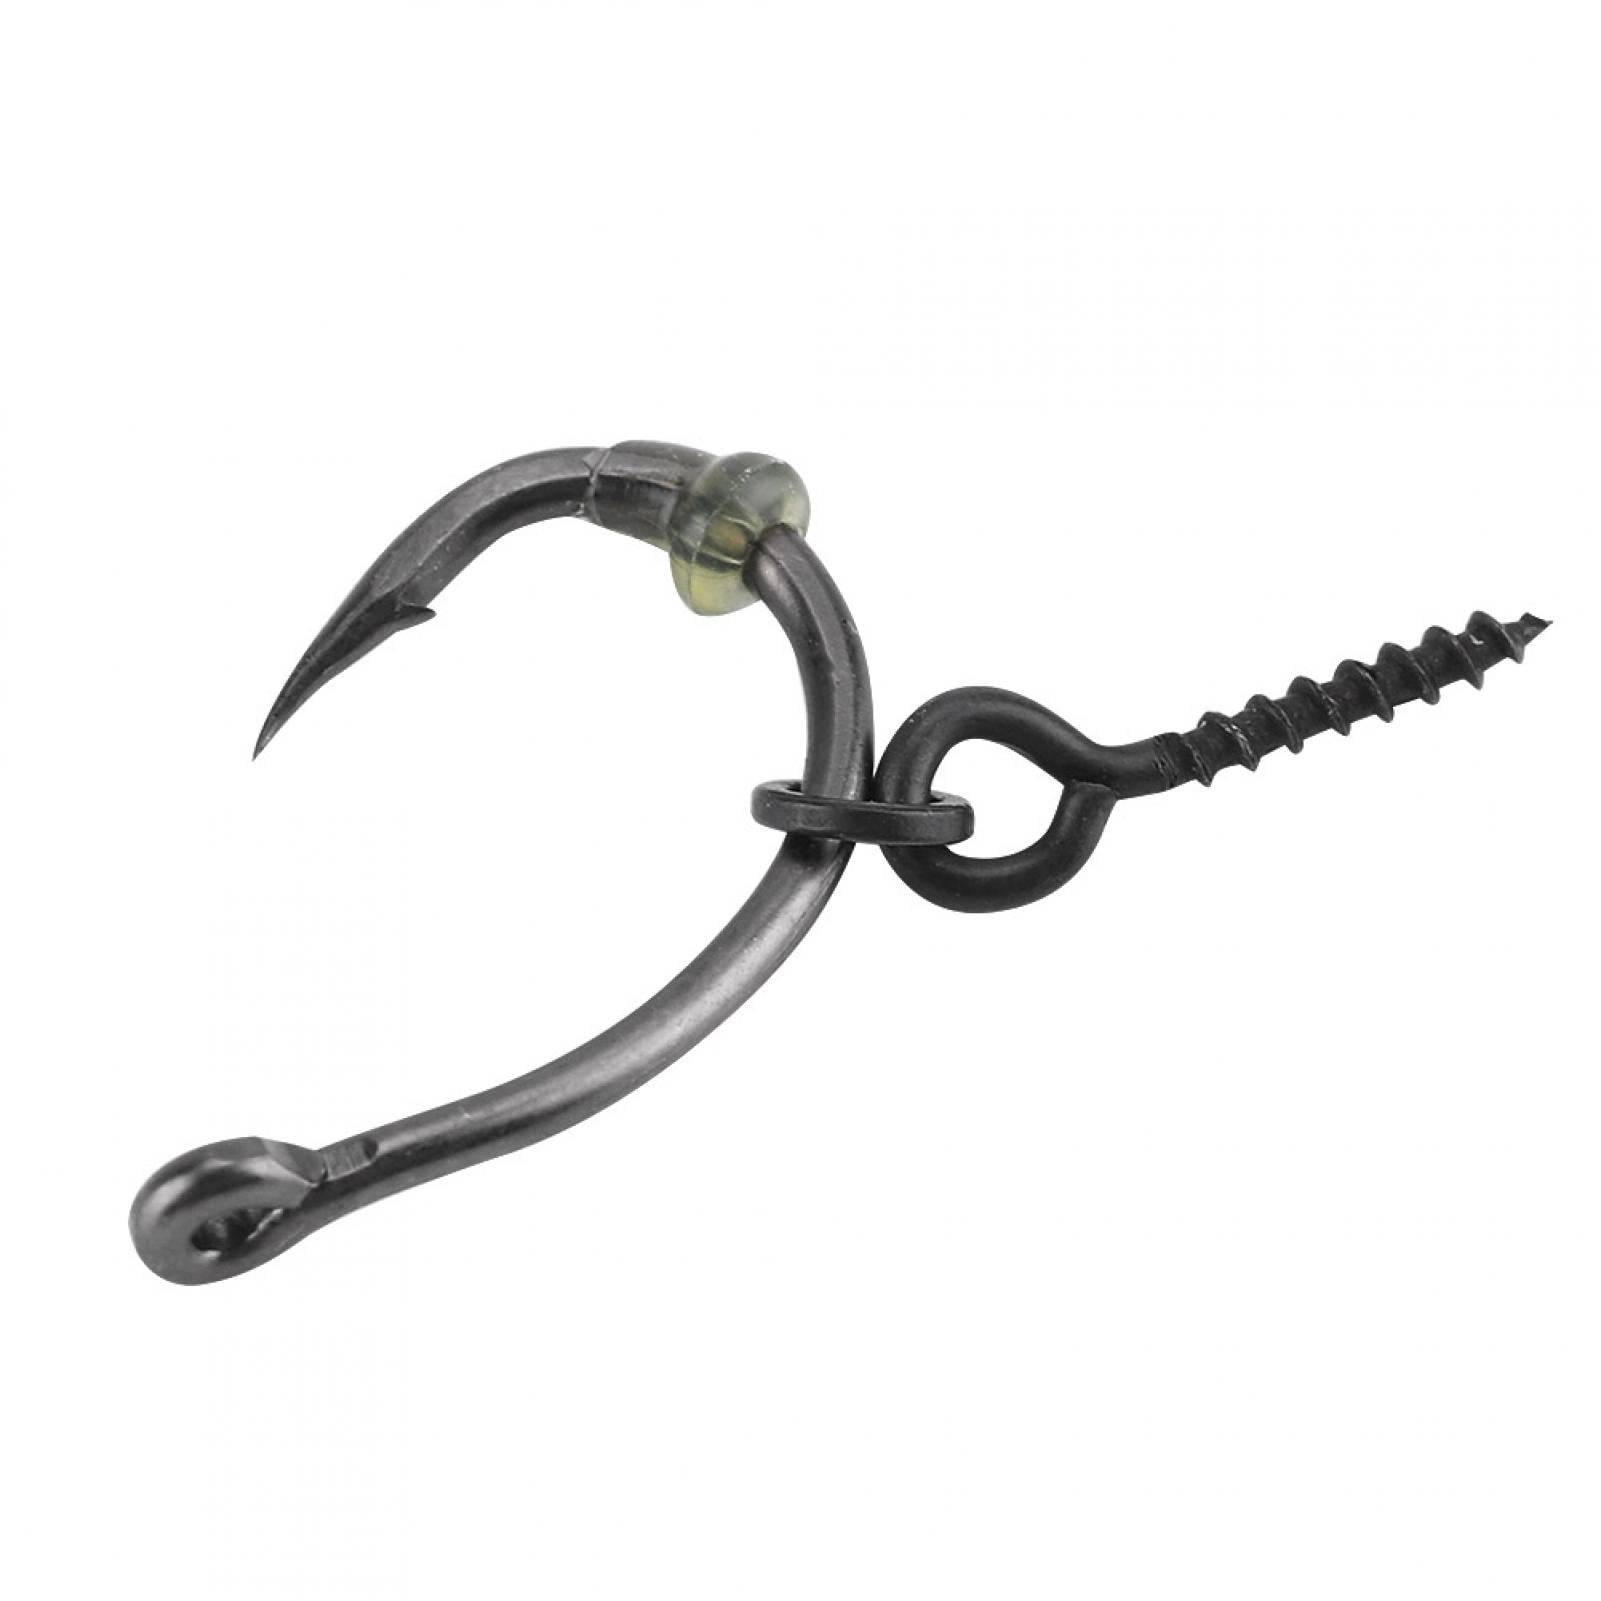 HOOK STOPS Carp Ronnie Rig Fishing Terminal Tackle Various Sizes and Quantities. 